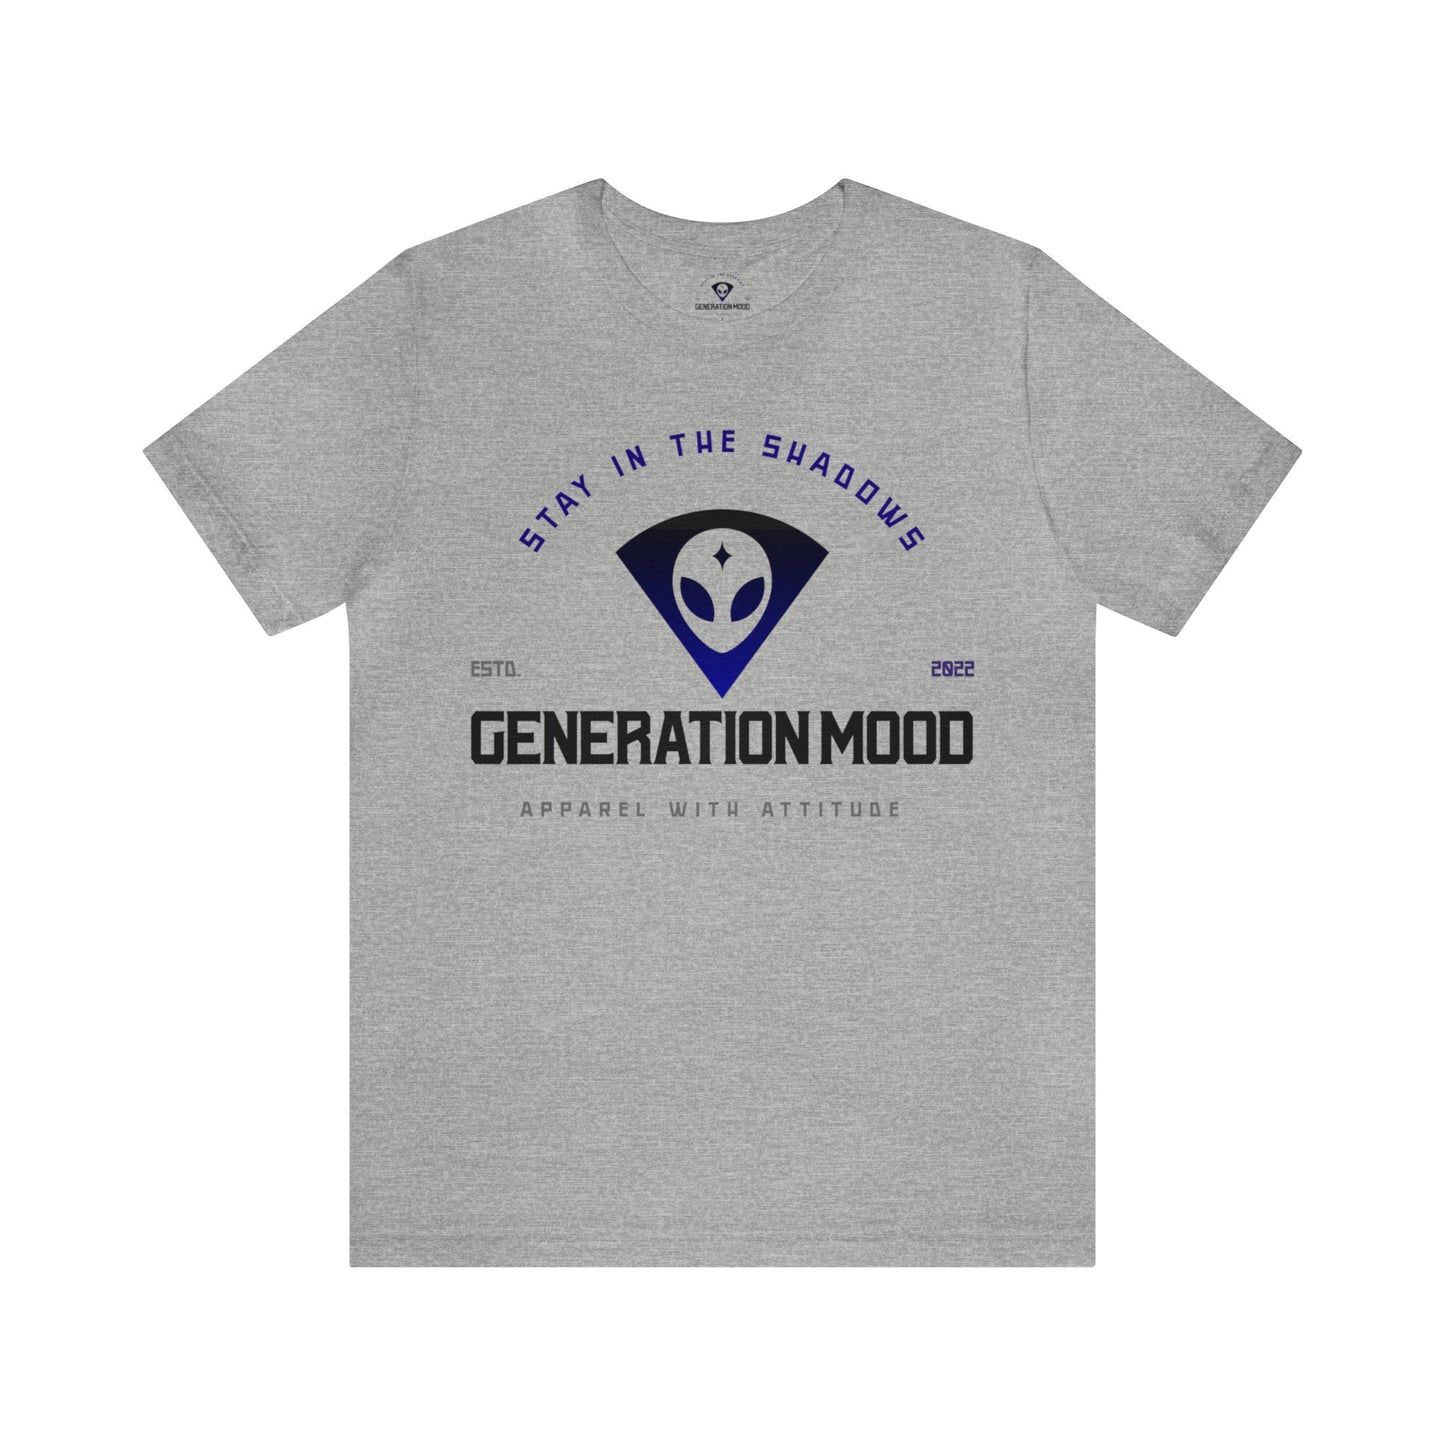 Are you ready to channel your inner cosmic wanderer? Our exclusive Generation Mood logo alien t-shirt combines nostalgia and a dash of intergalactic cool. Whether you are a believer in little beings or just love a good logo tee, this shirt is for you. In Grey